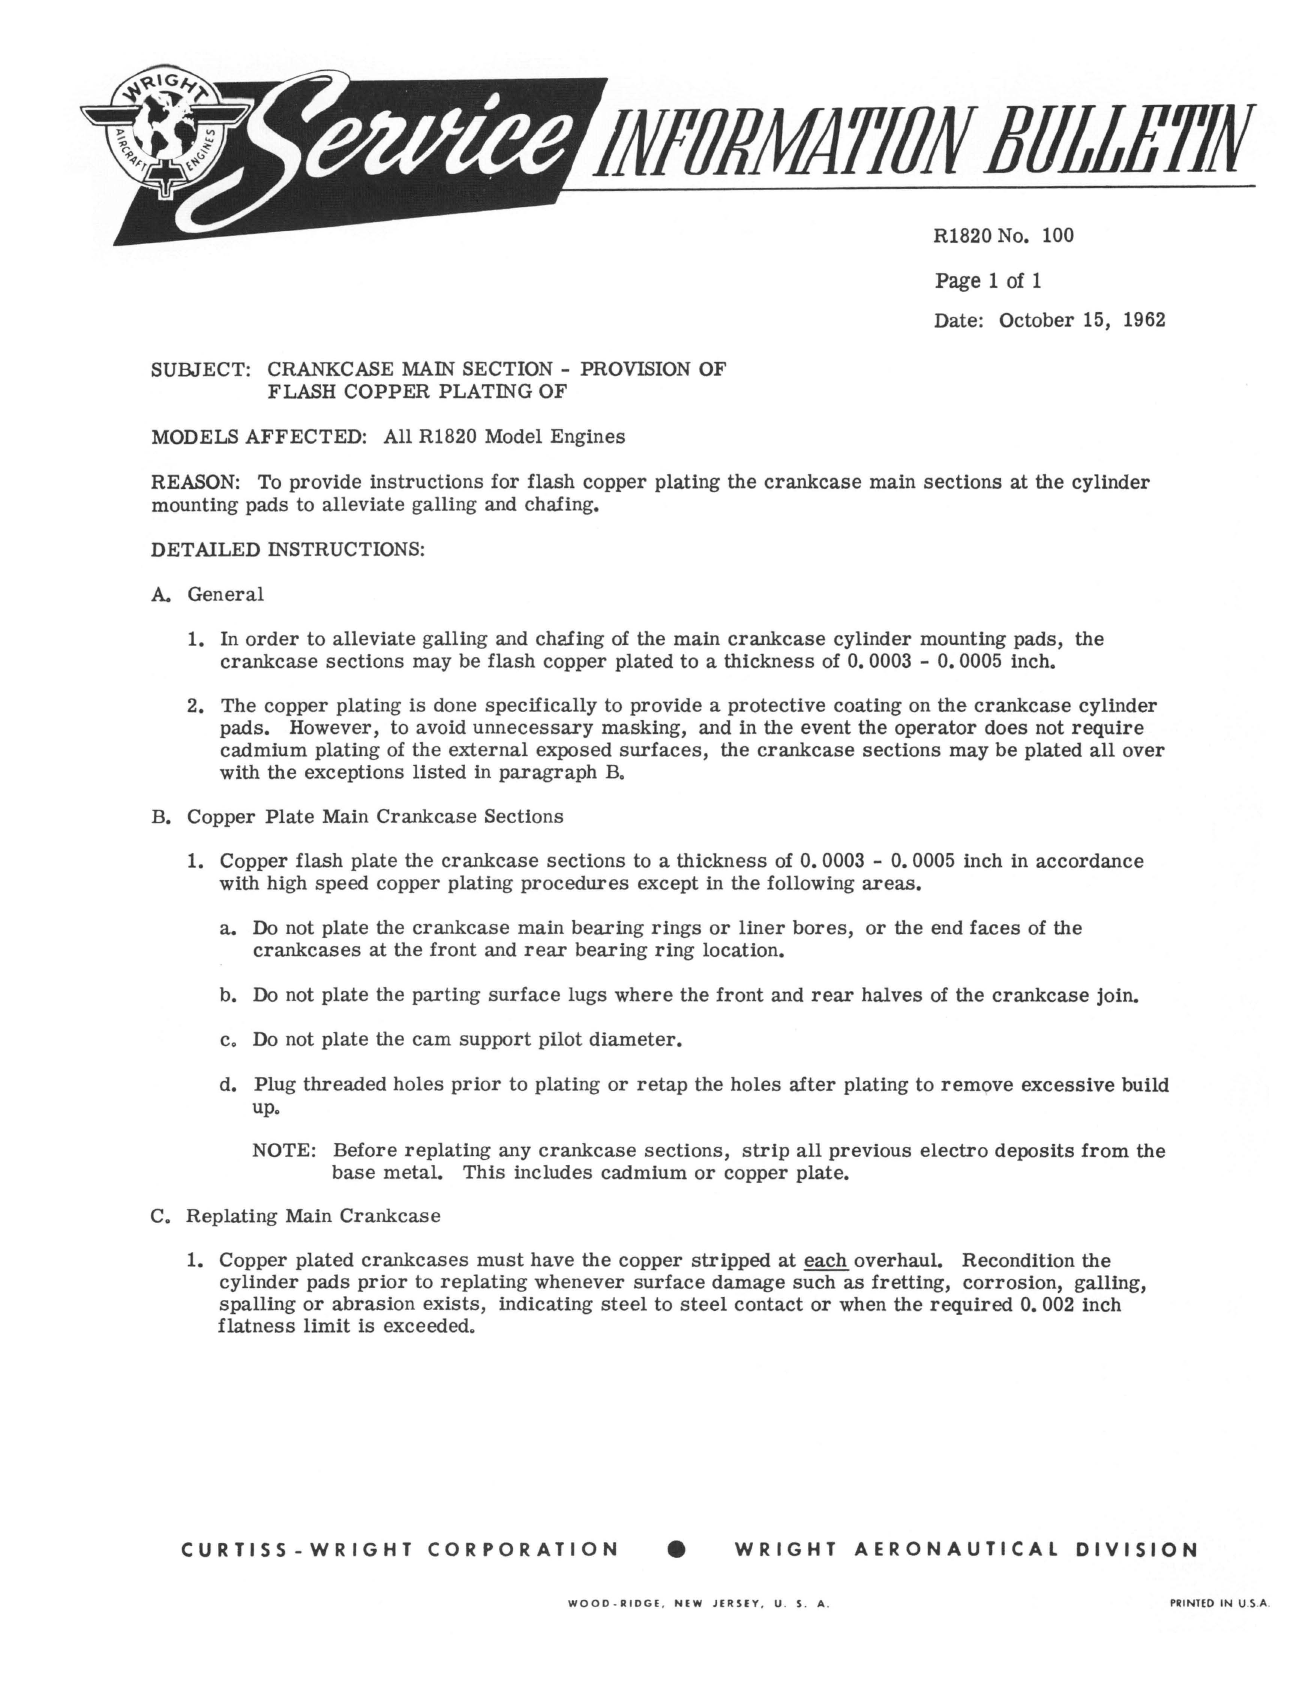 Sample page 1 from AirCorps Library document: Provision of Flash Copper Plating of Crankcase Main Section